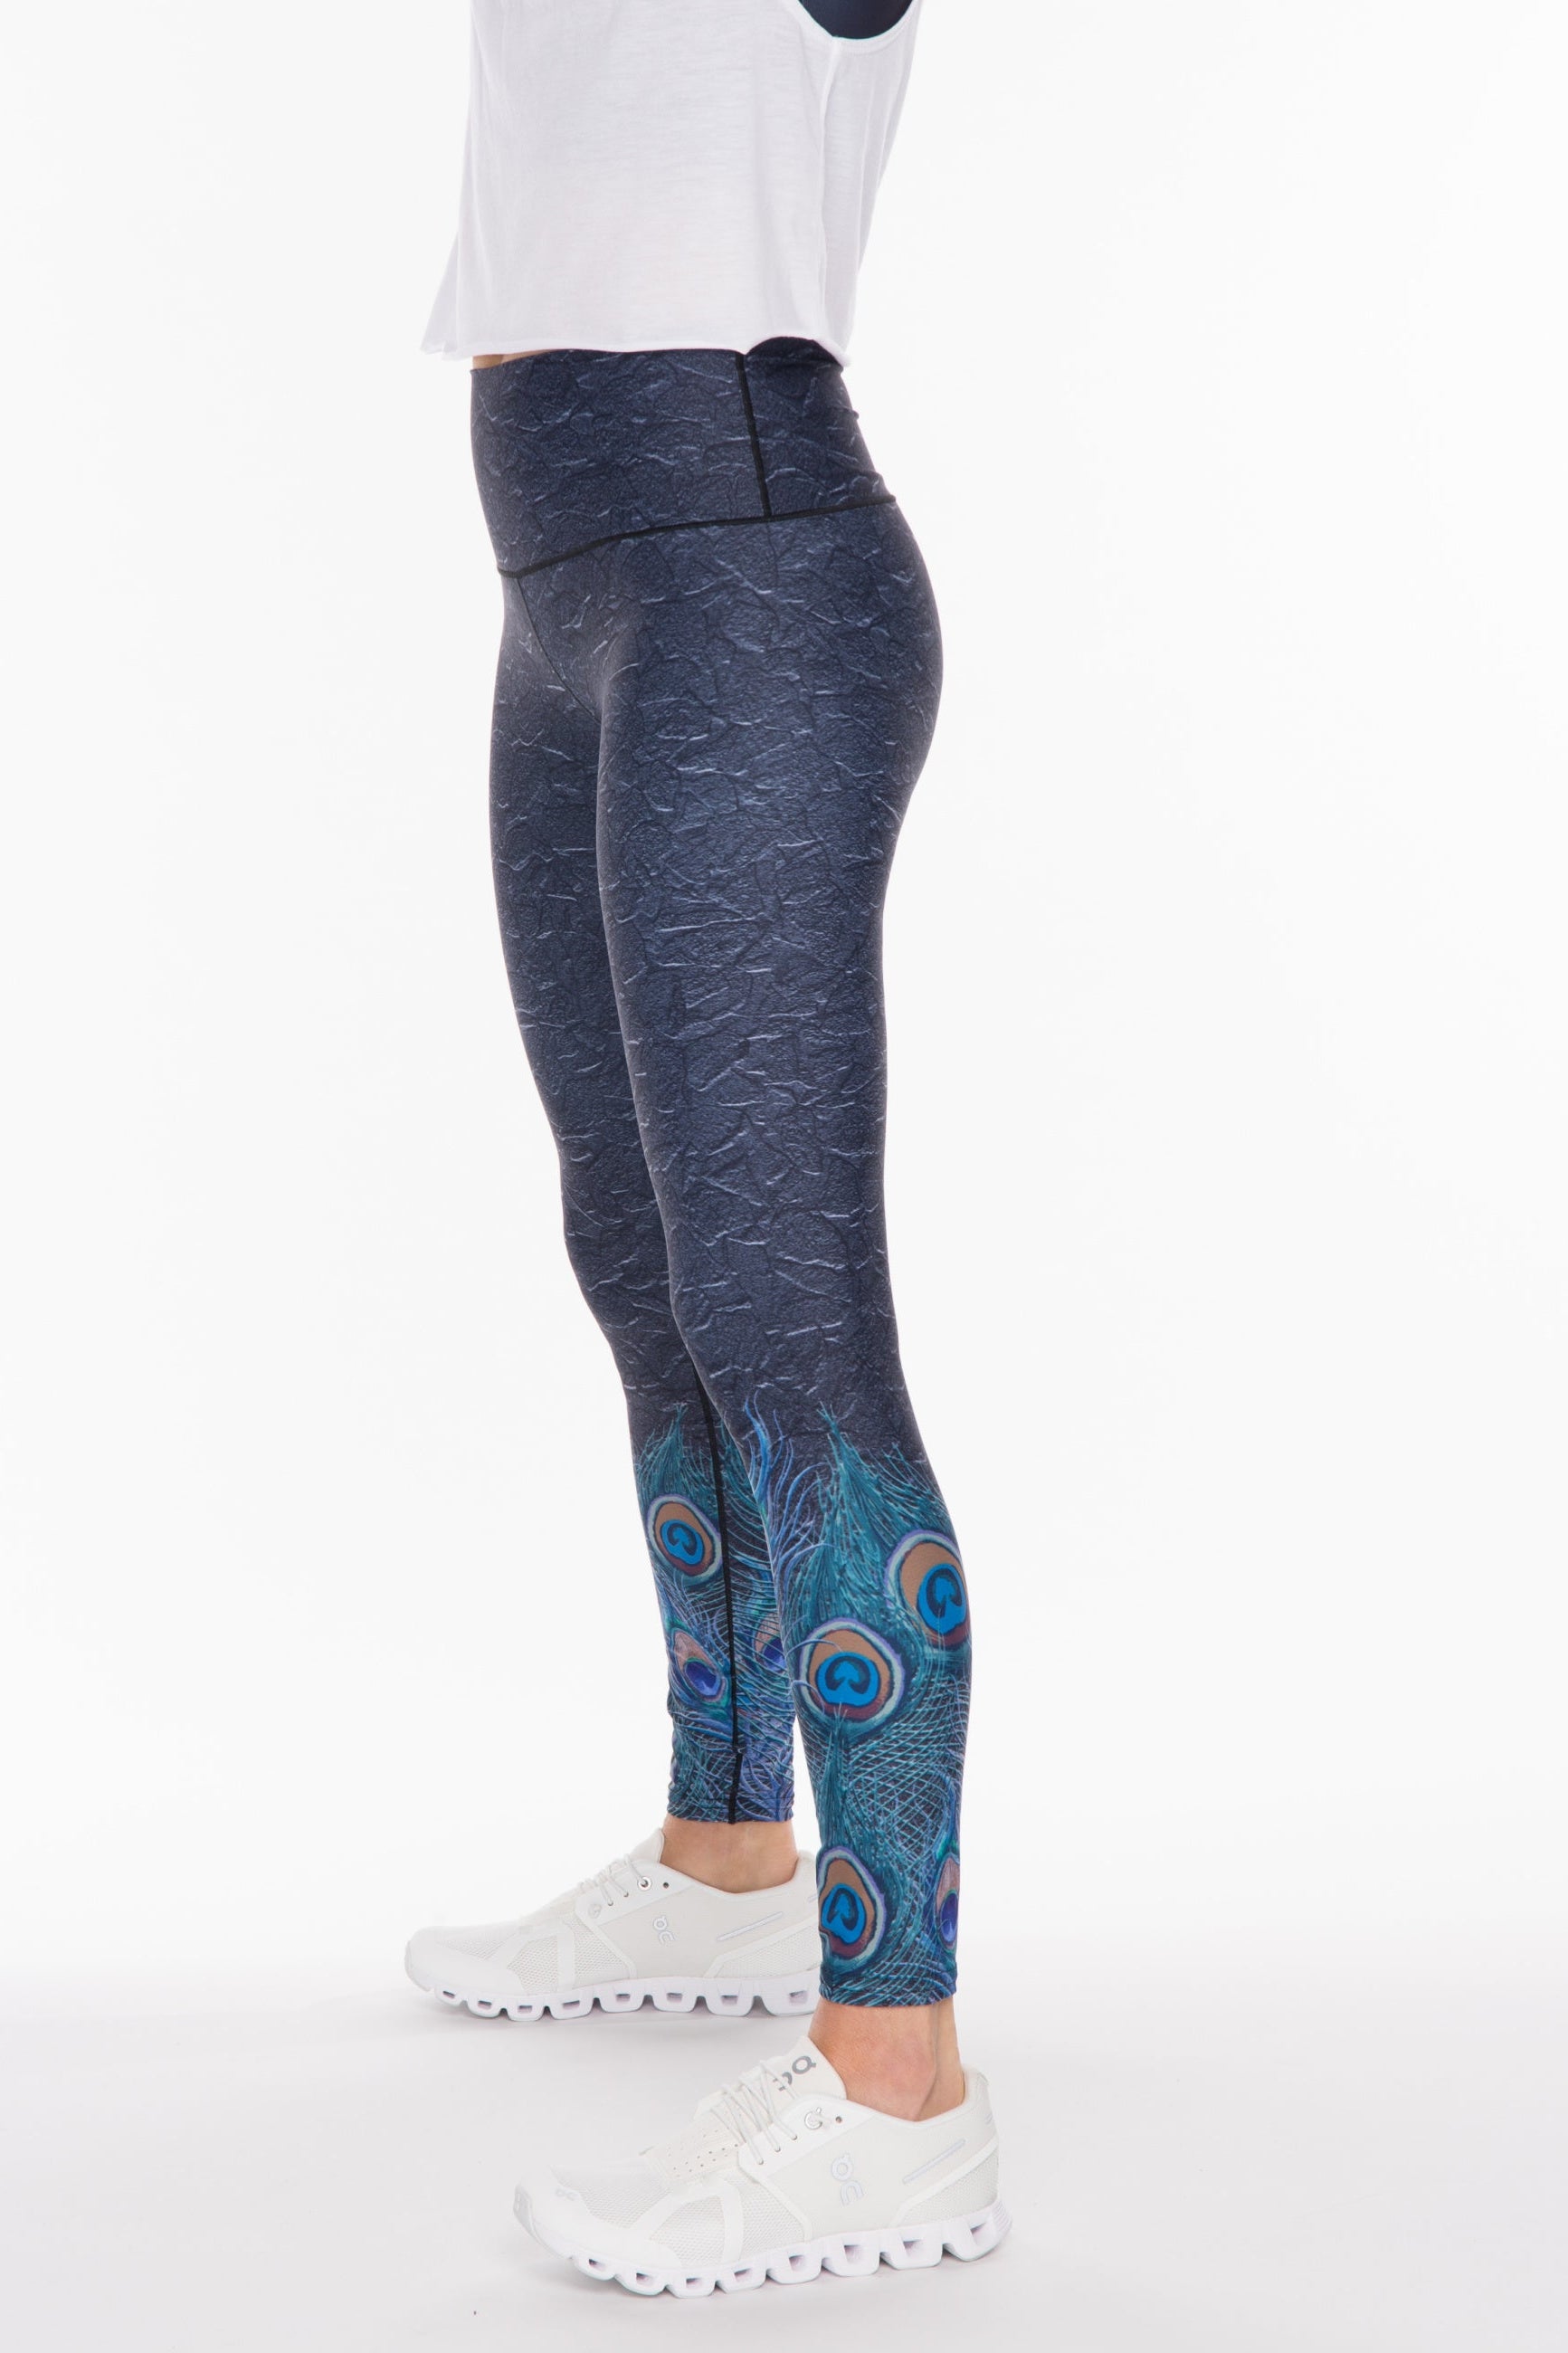 Yoga Pants Light as a Feather Colorado Threads Clothing